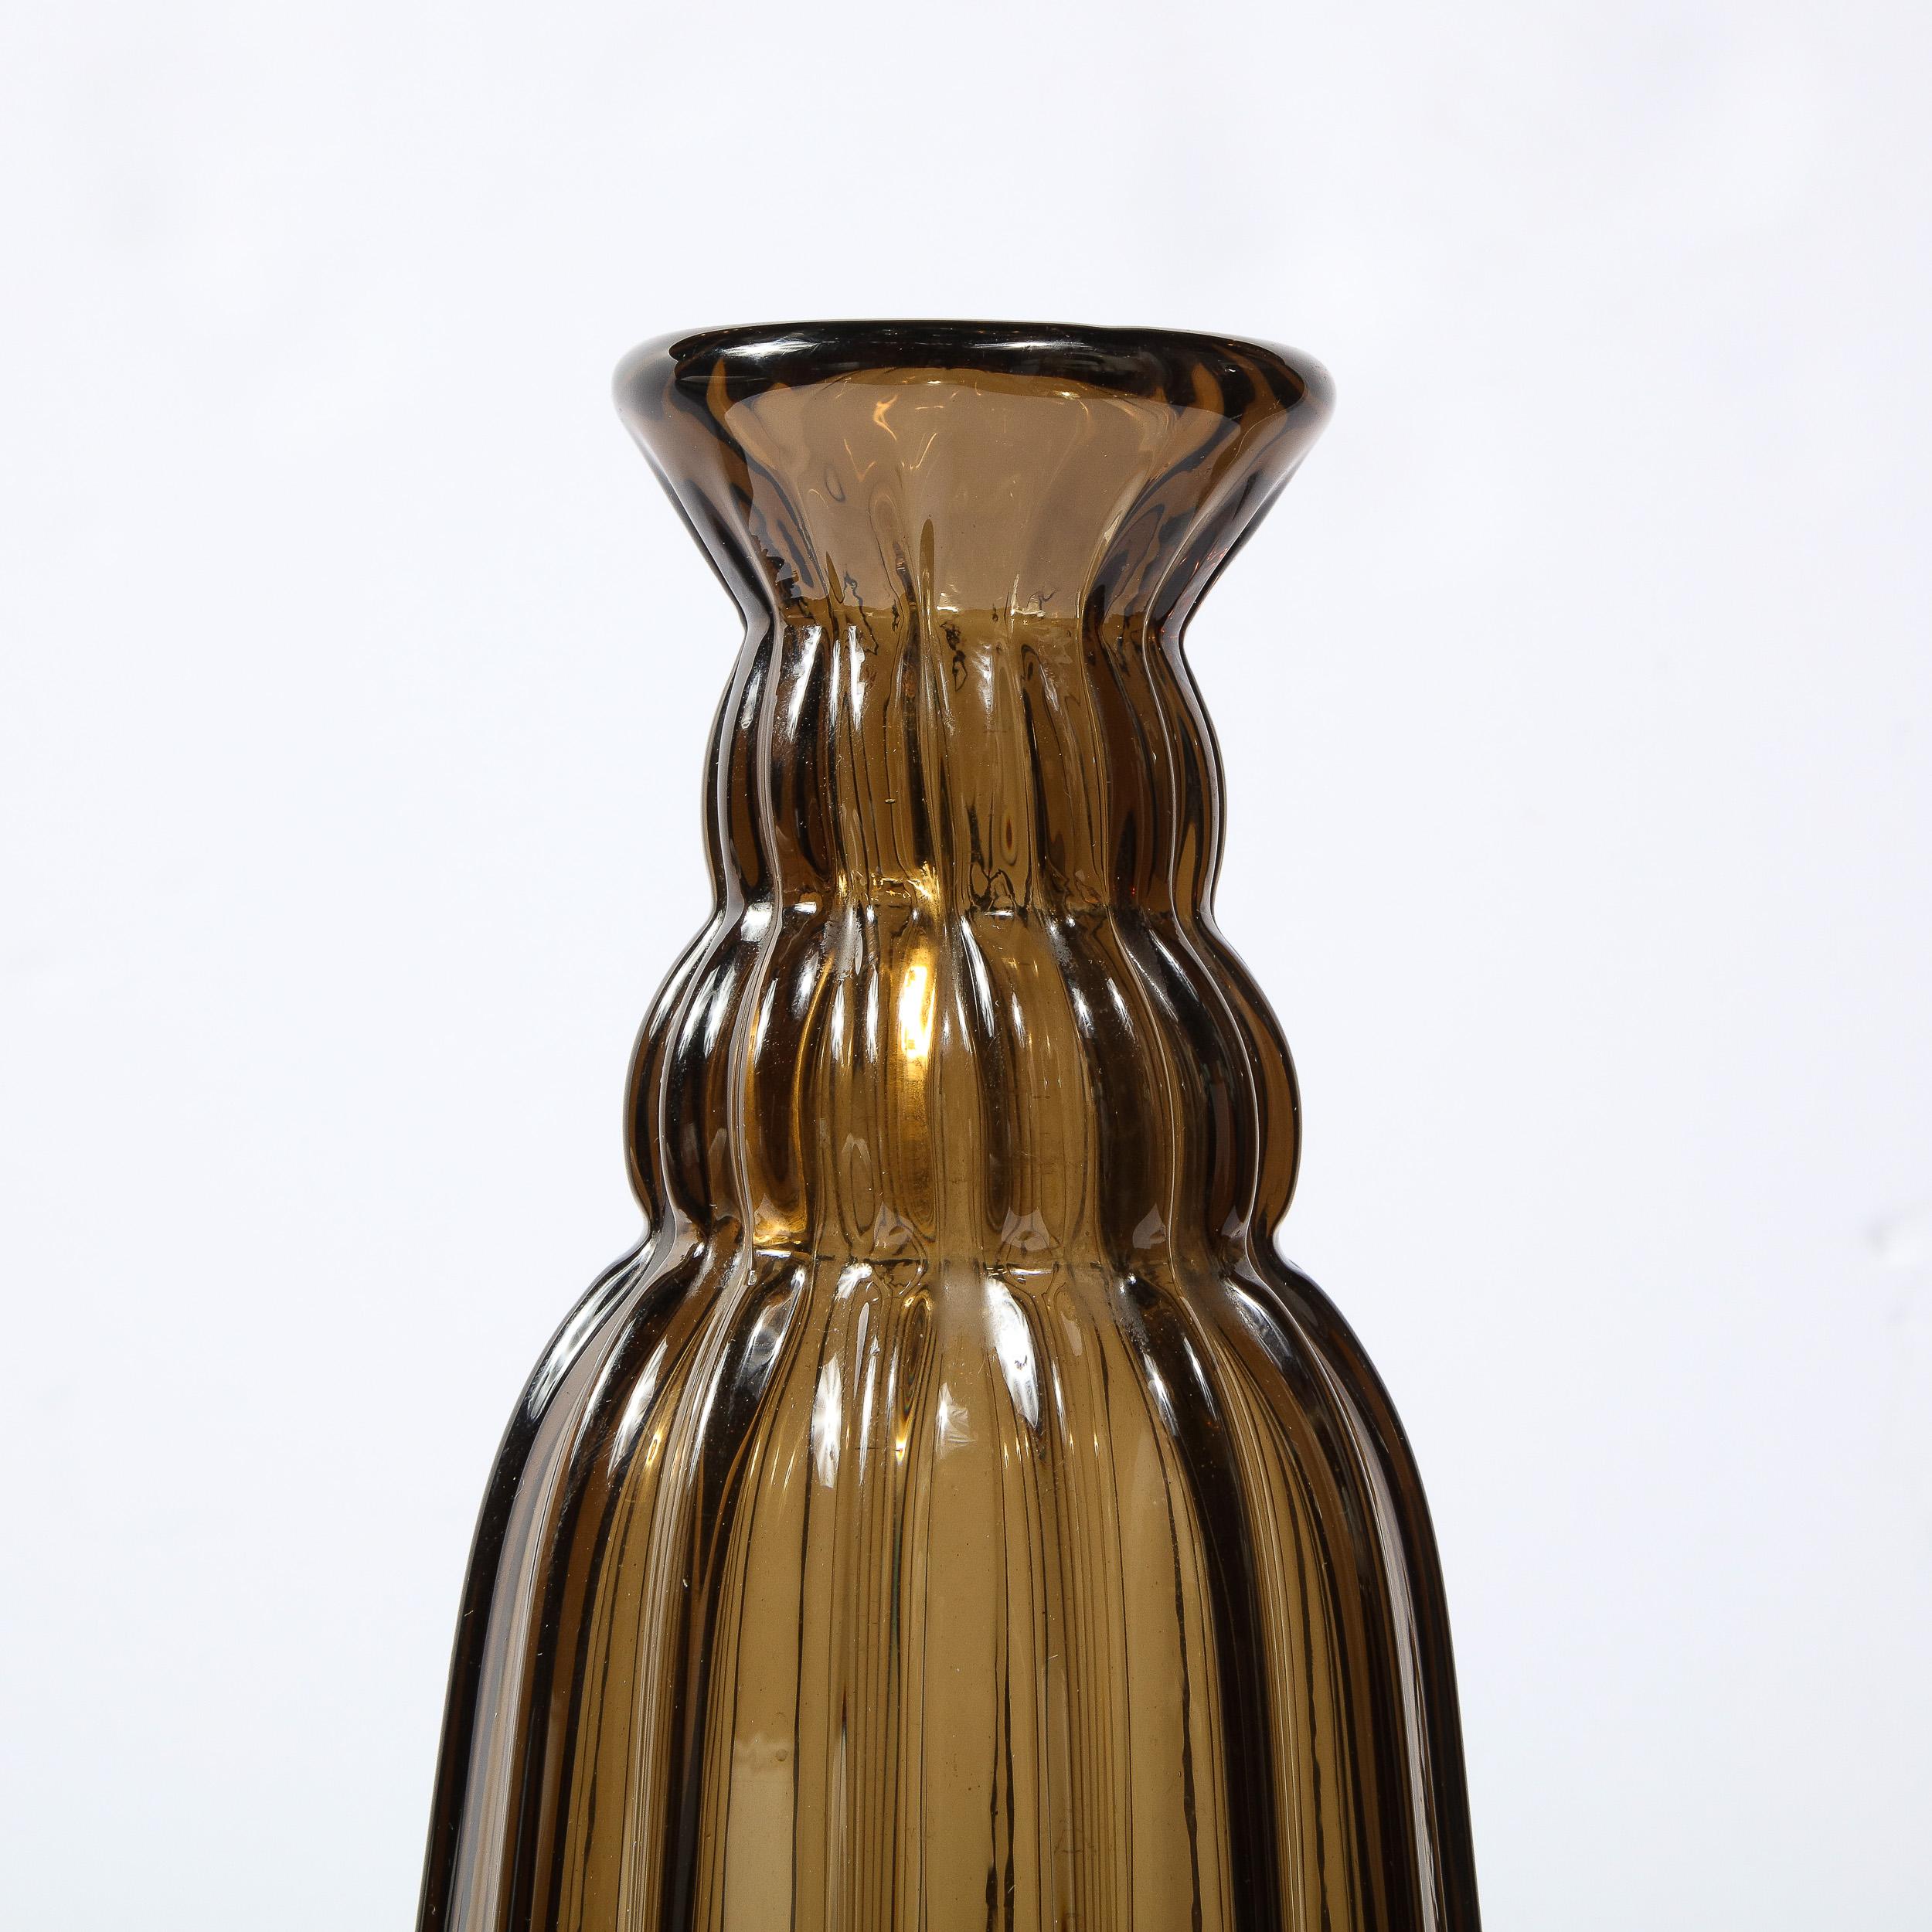 1930s Art Deco Topaz Colored Hand Blown Tall Vase, Signed by Daum Nancy France For Sale 3